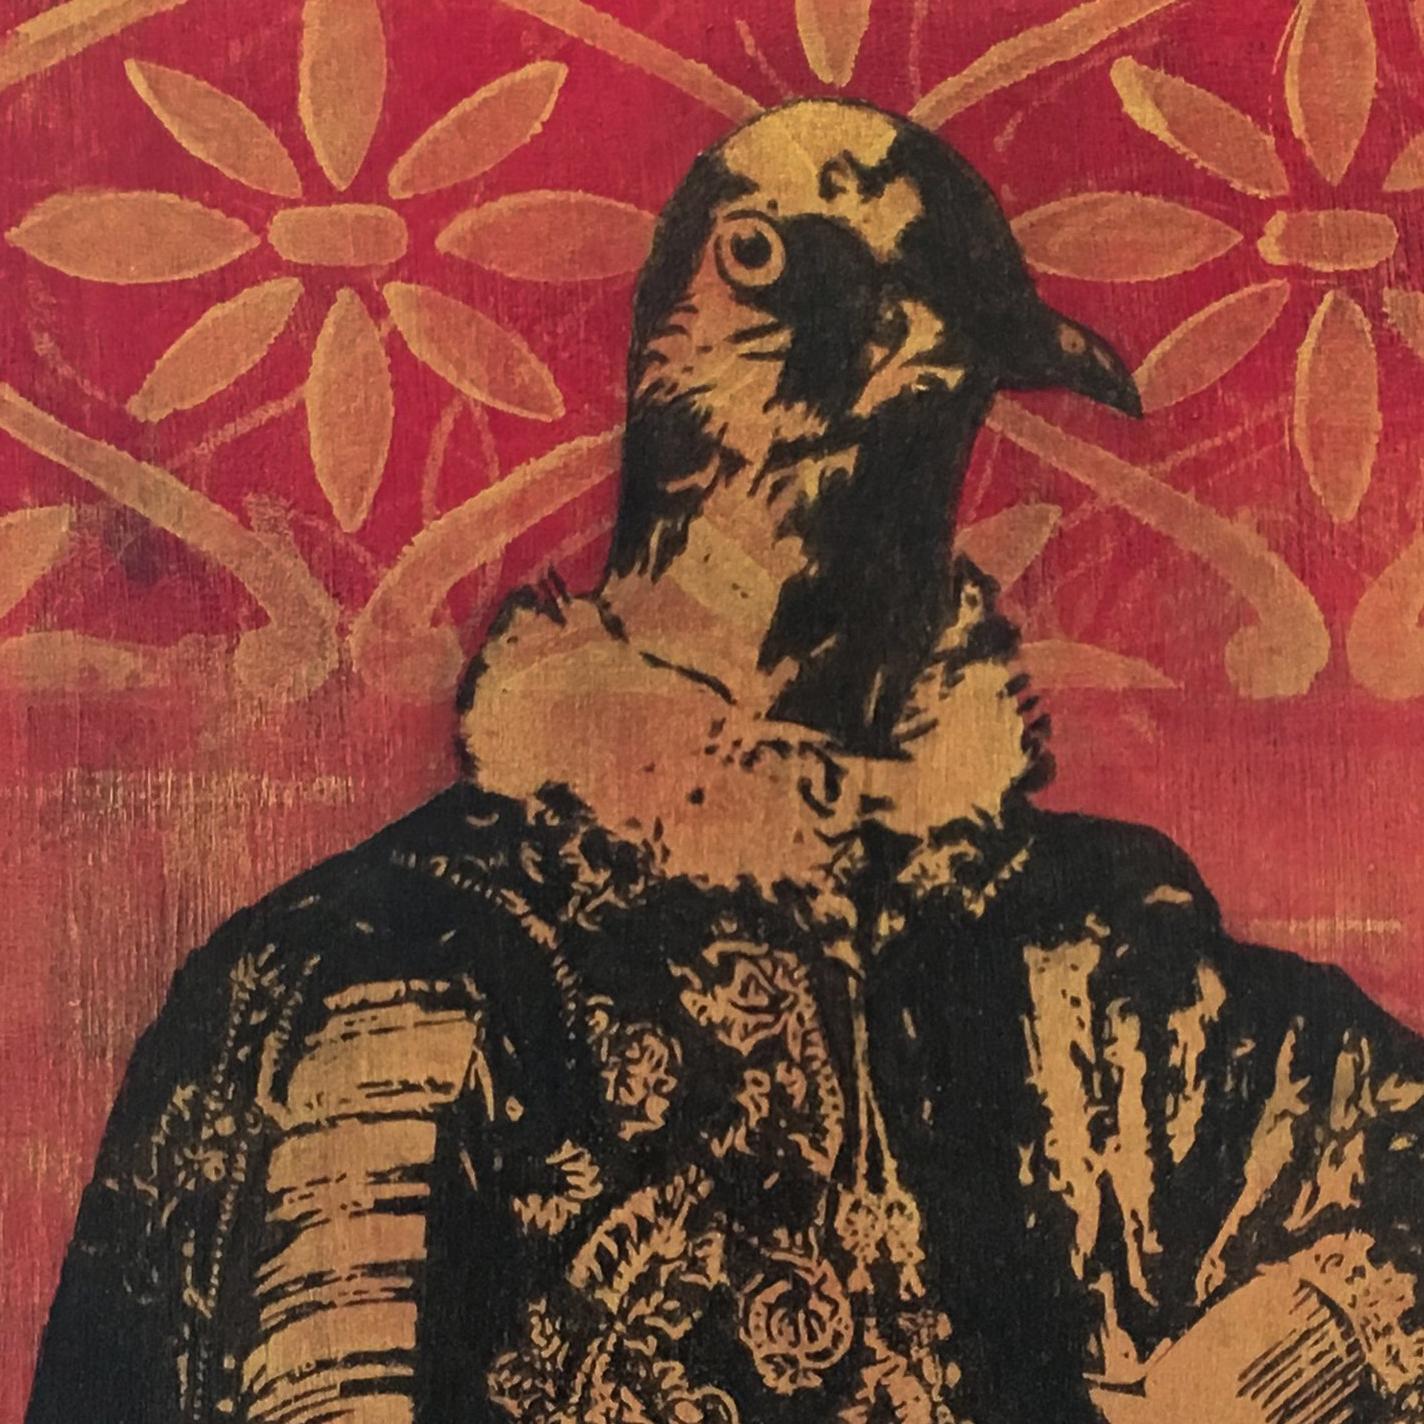 Holly Harrison's mixed media piece on panel portrays a pigeon in a traditional portrait style. The black and gold pigeon emerges from the gold and red of the background. The background colors are remanent of jewel tones referring wealth and status. 